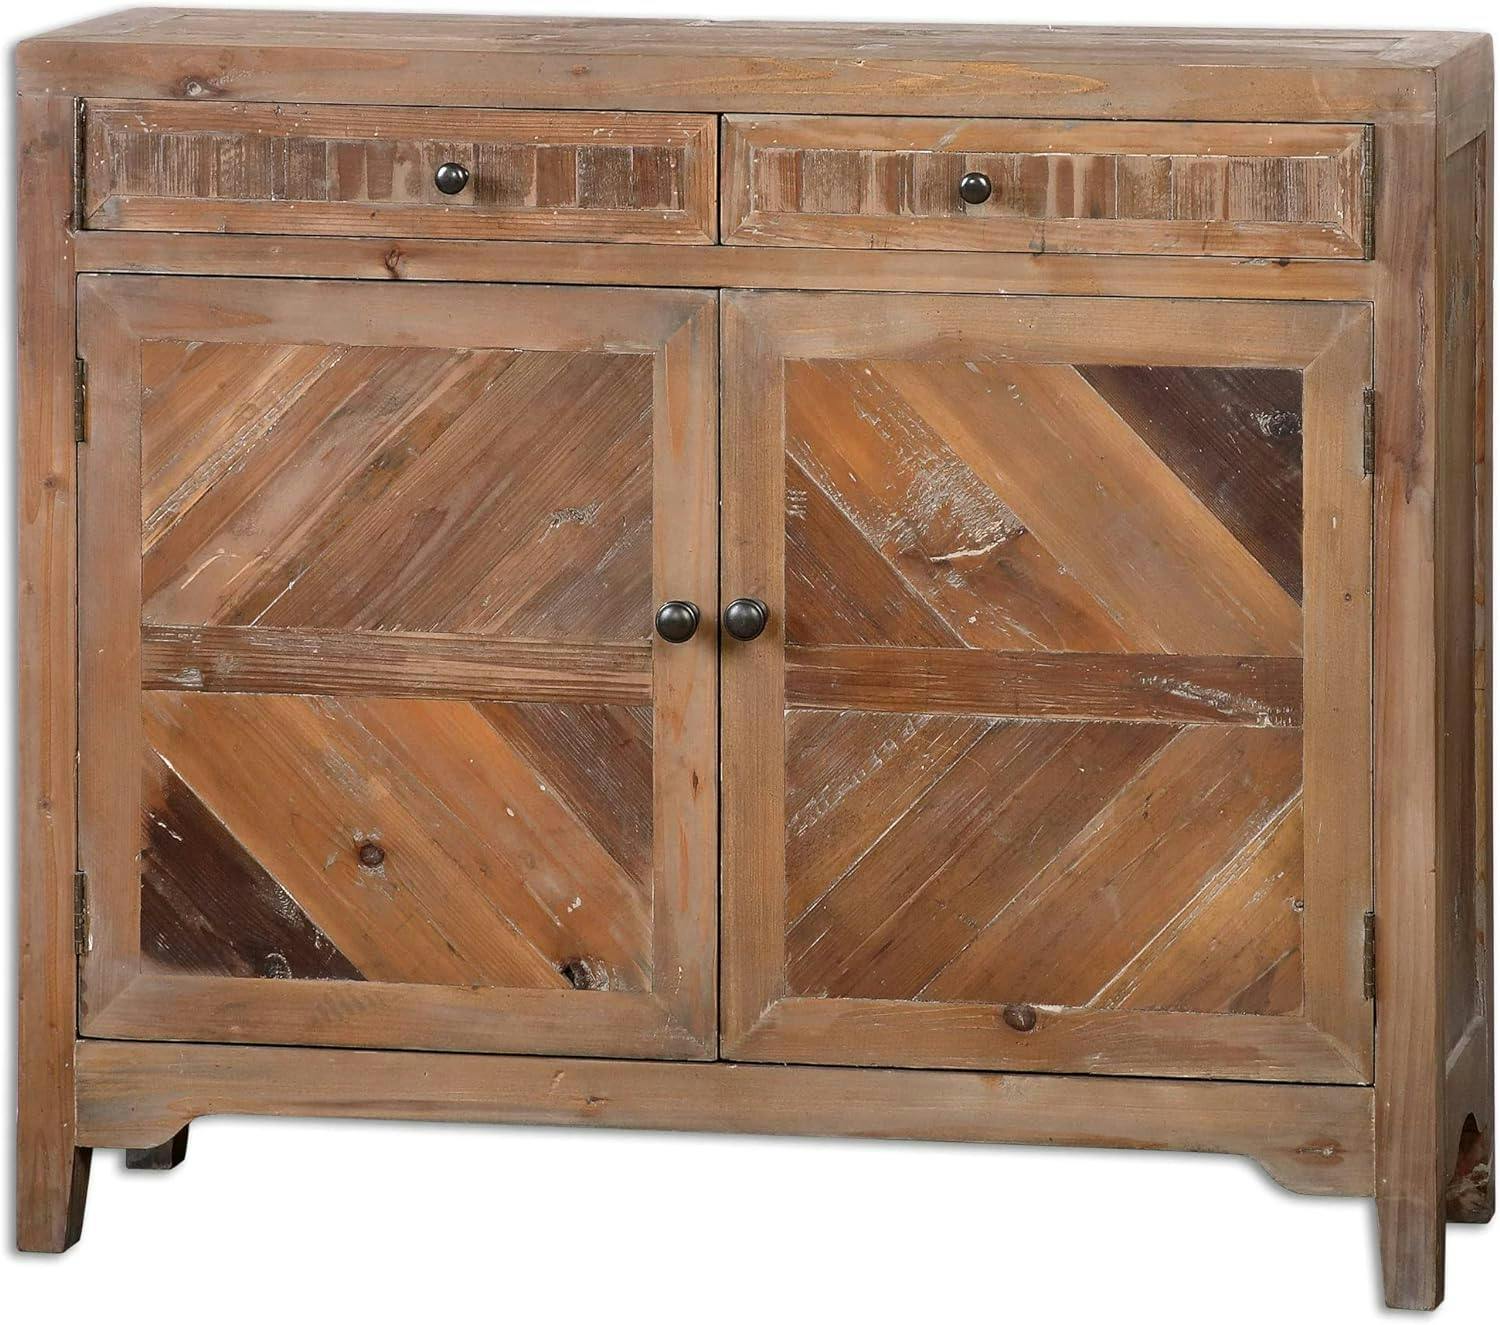 Rustic Reclaimed Fir Wood Console with Swing-Out Drawers